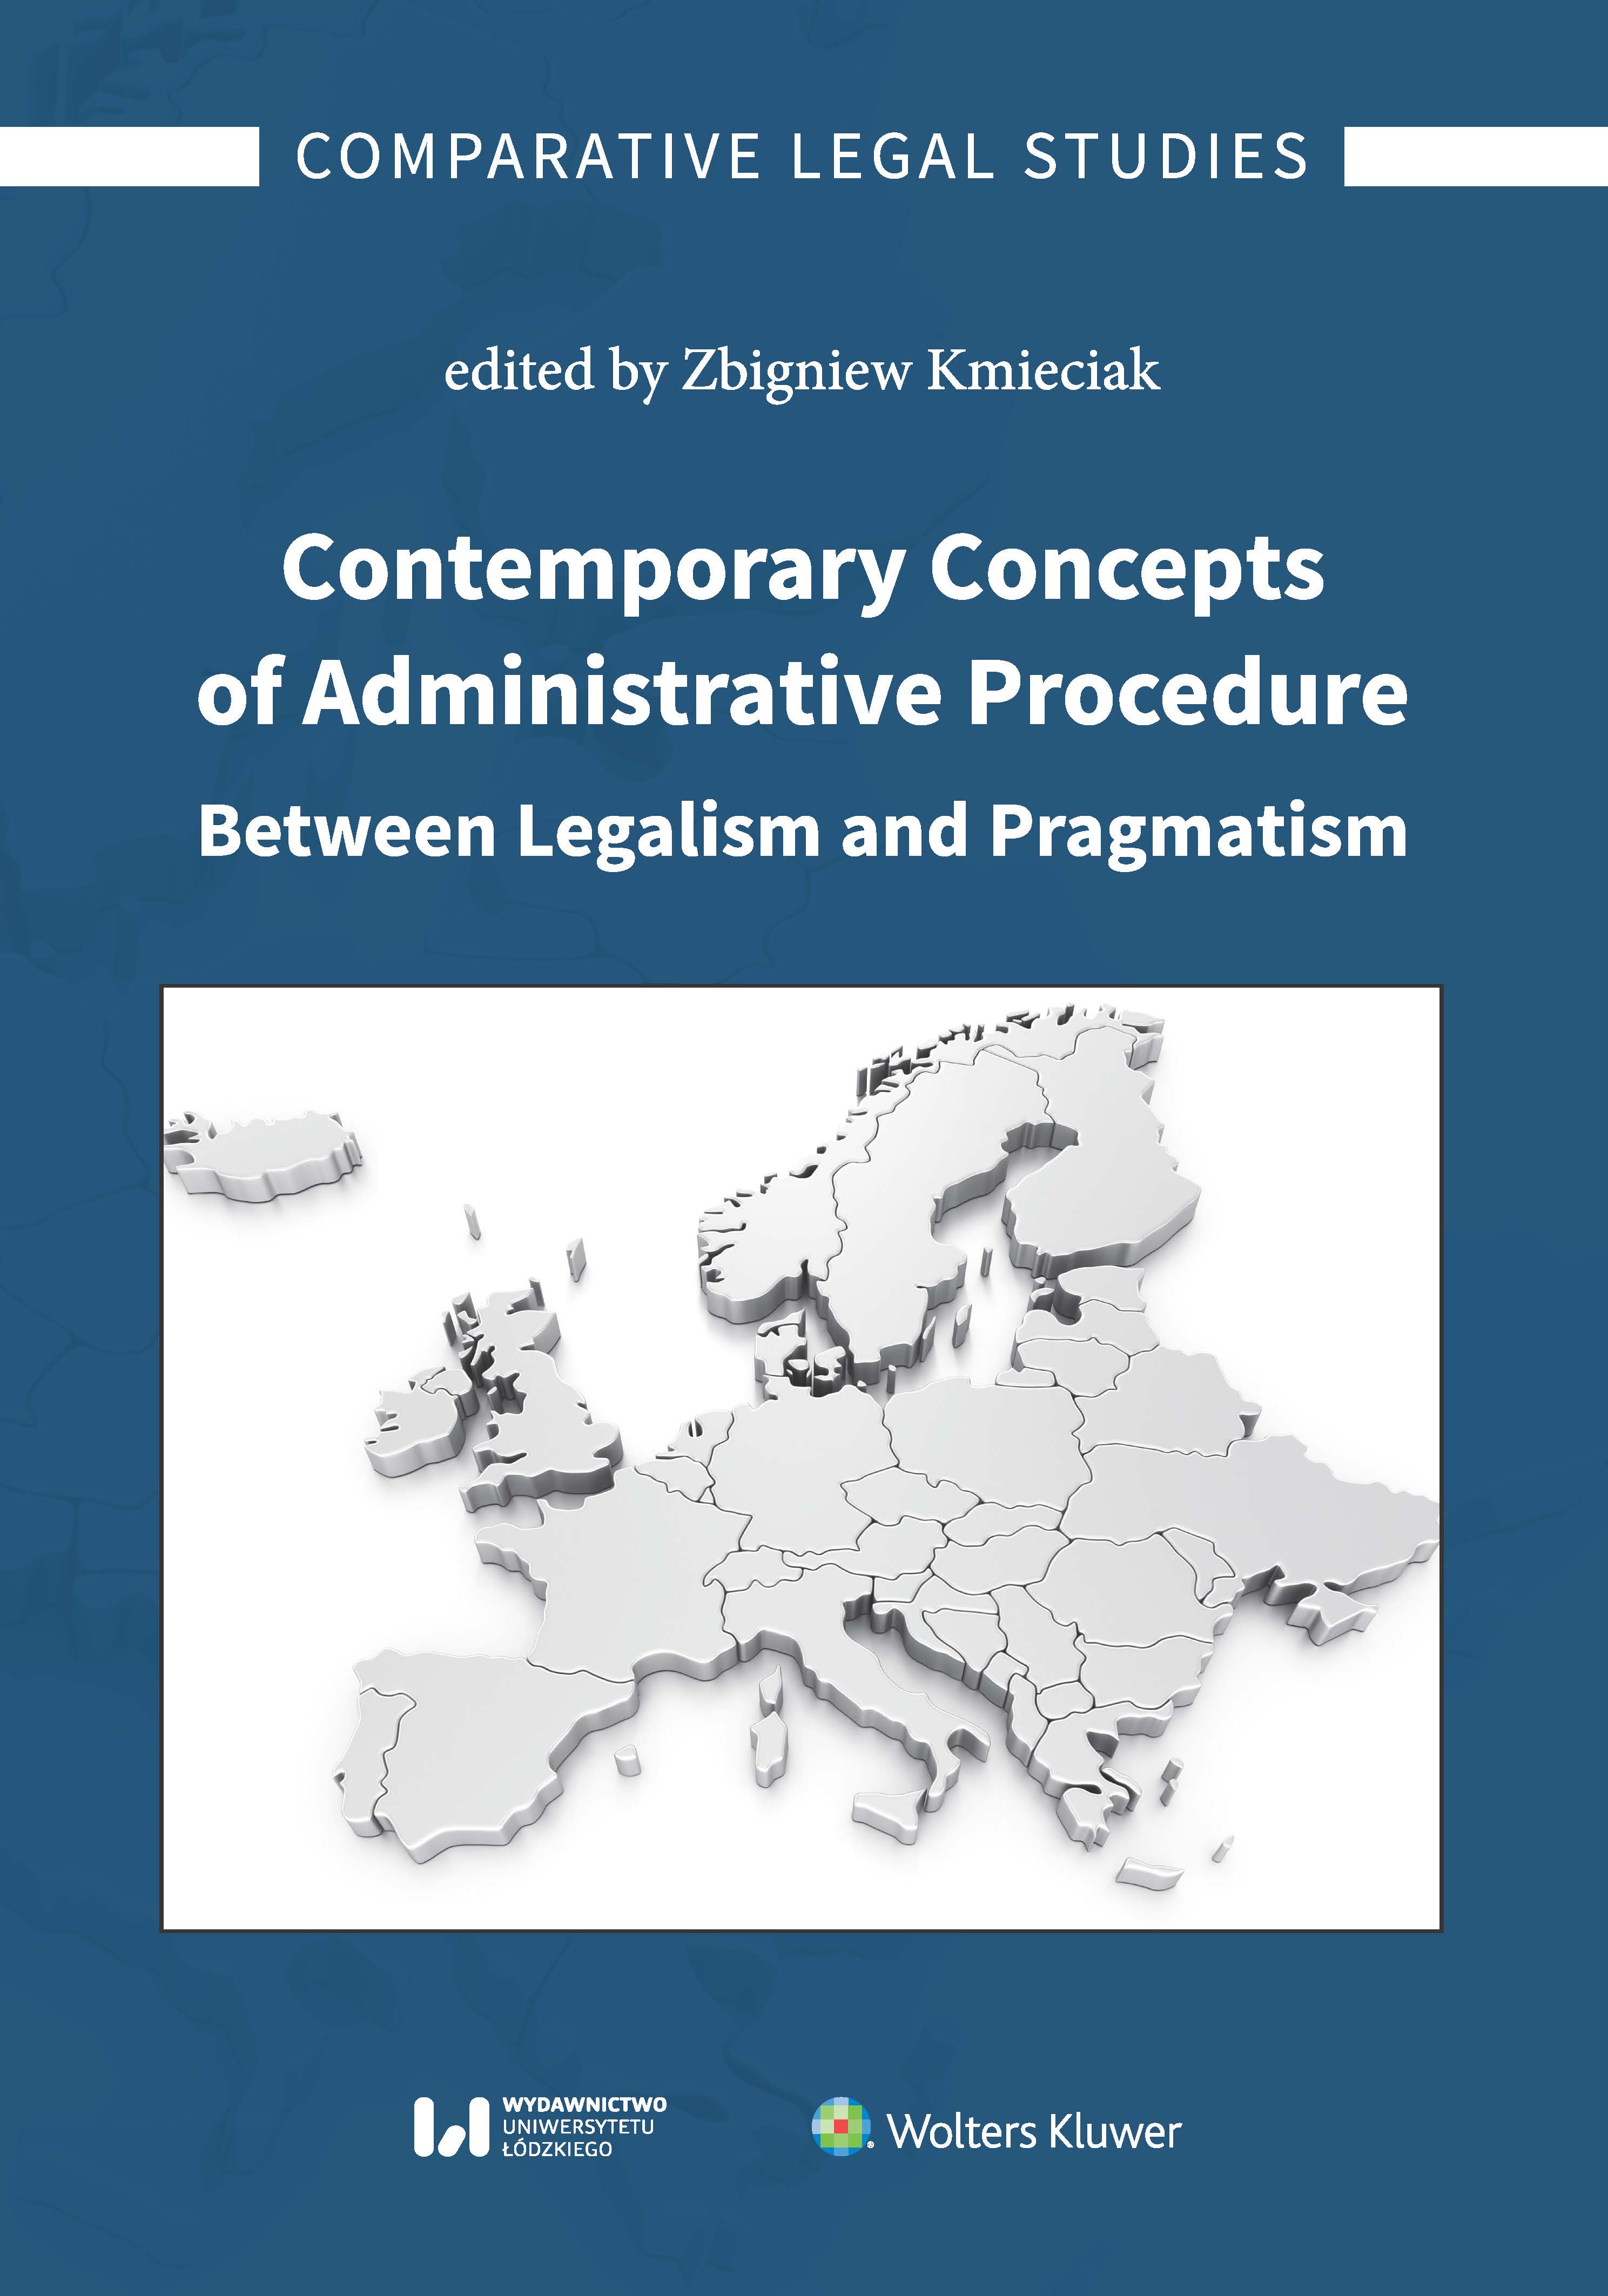 About Subjective Rights in Procedural. Administrative Law